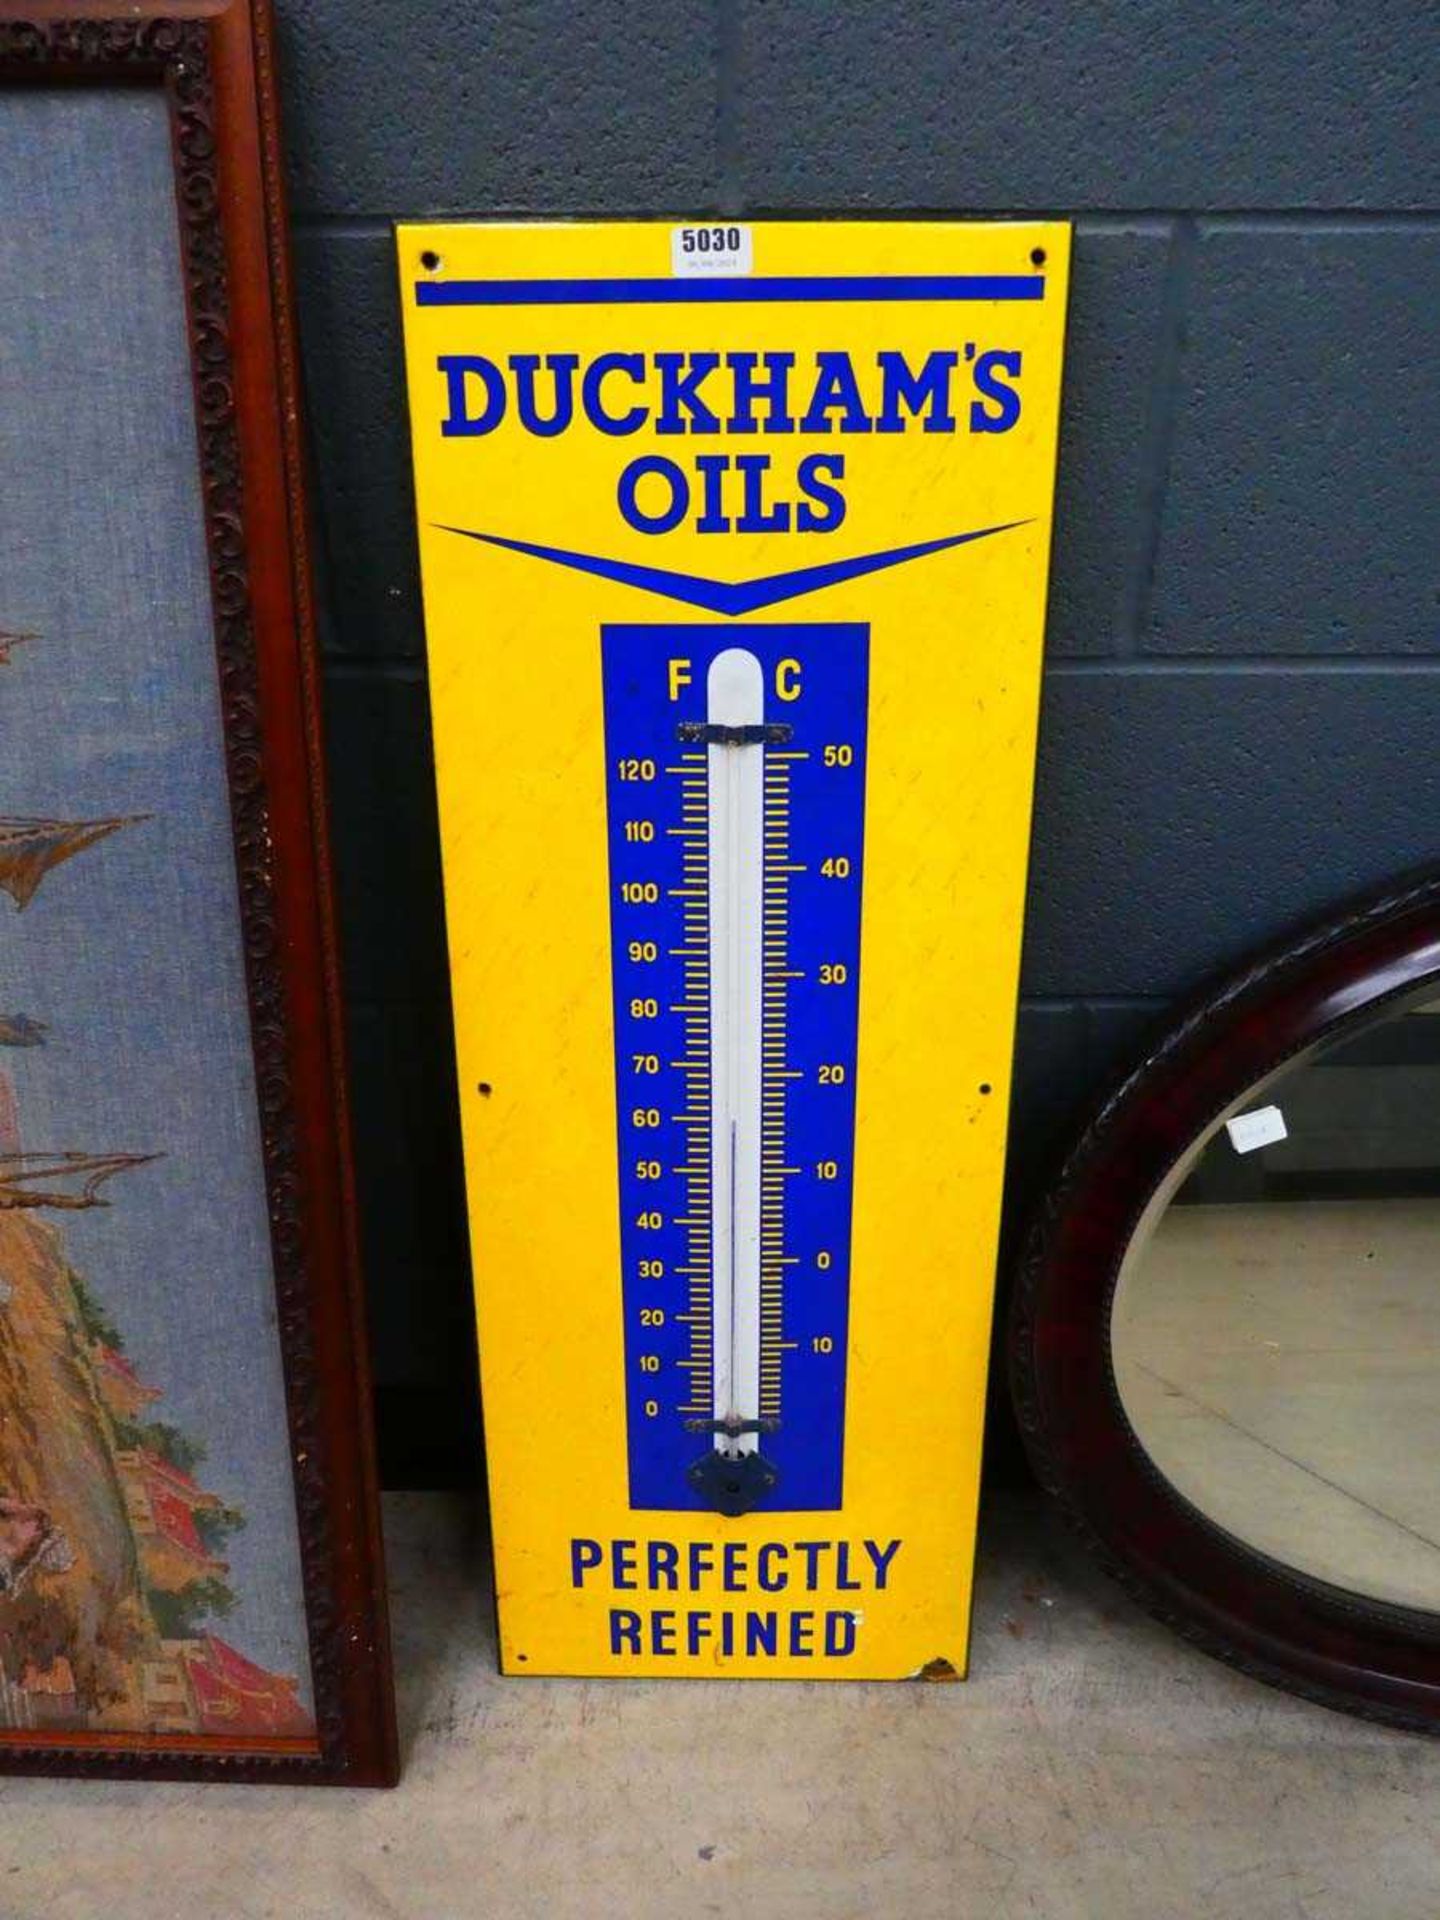 Duckhams oil thermometer The thermometer is in generally good condition with no noticeable damage